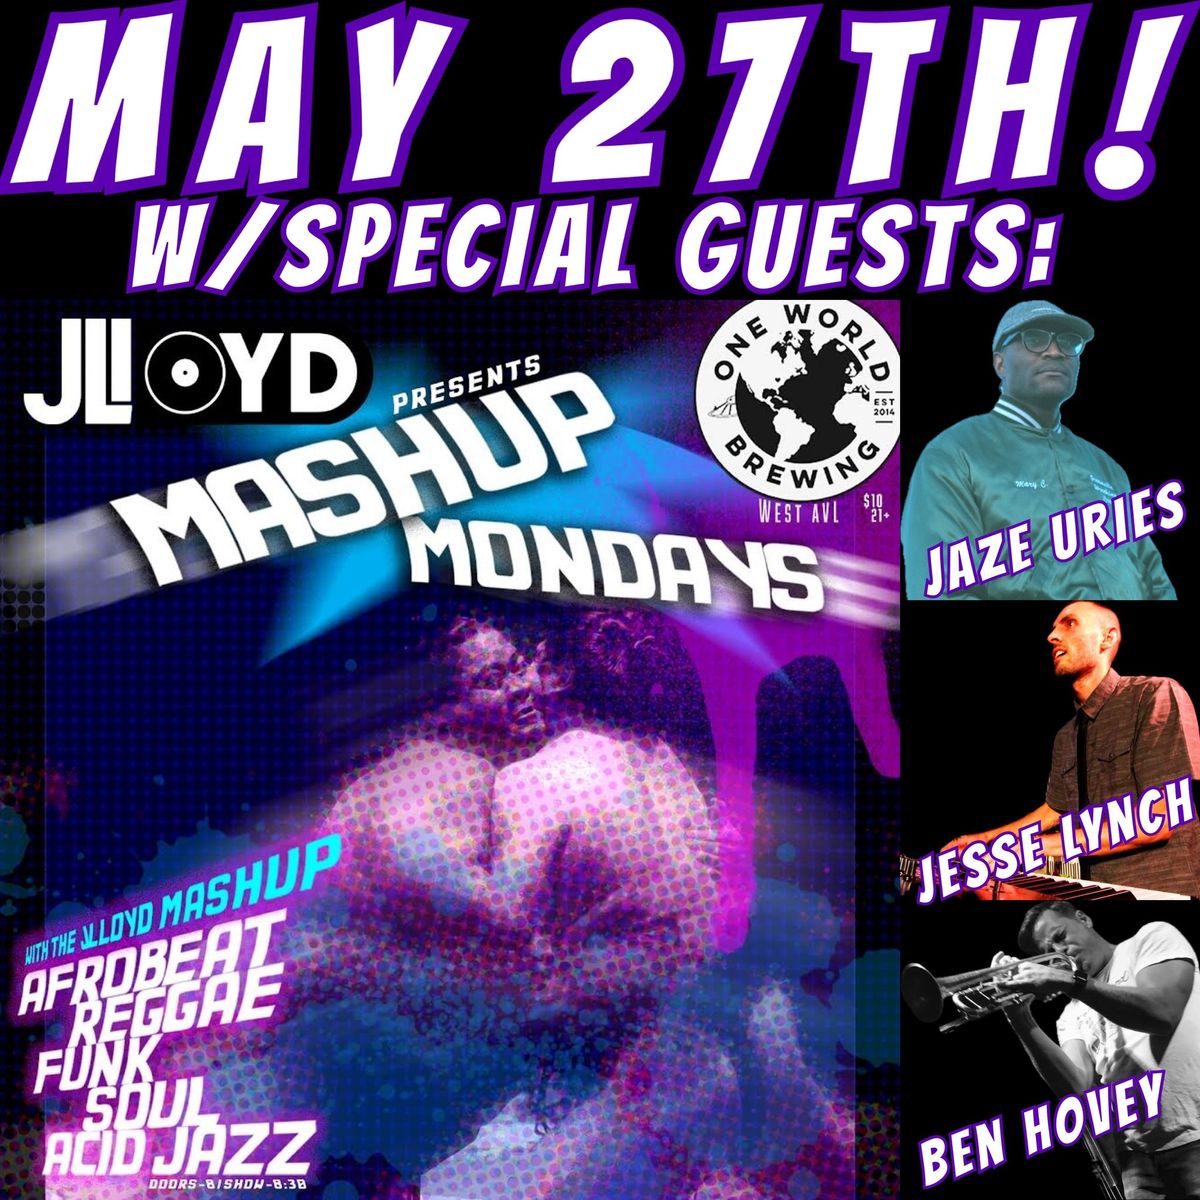 Monday Mashup 5\/27 w\/ sp. guests Jaze Uries, Jesse Lynch & Ben Hovey!